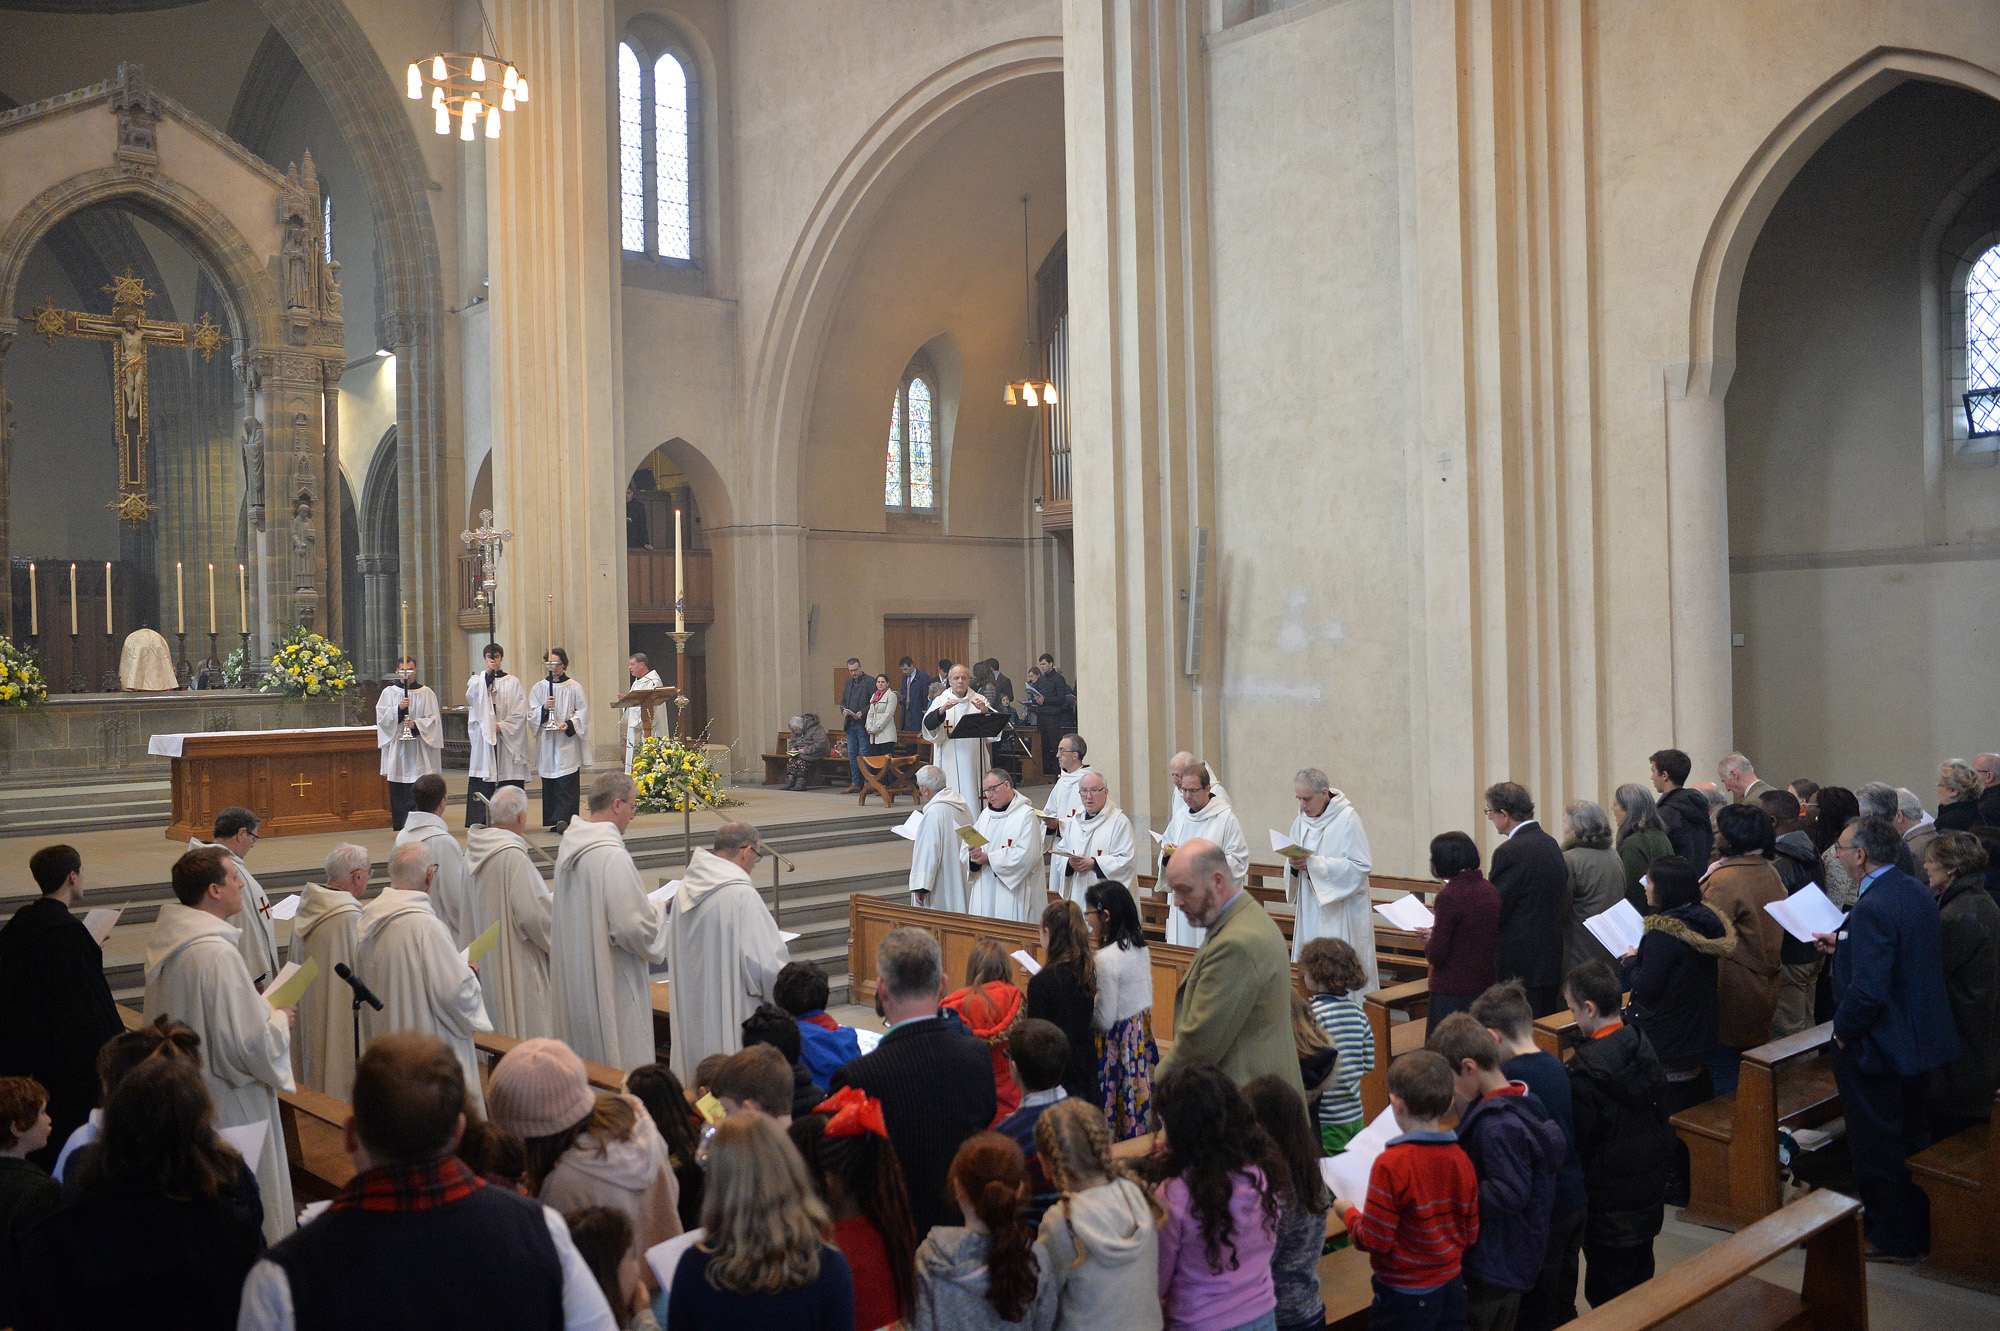 Easter at Ampleforth 